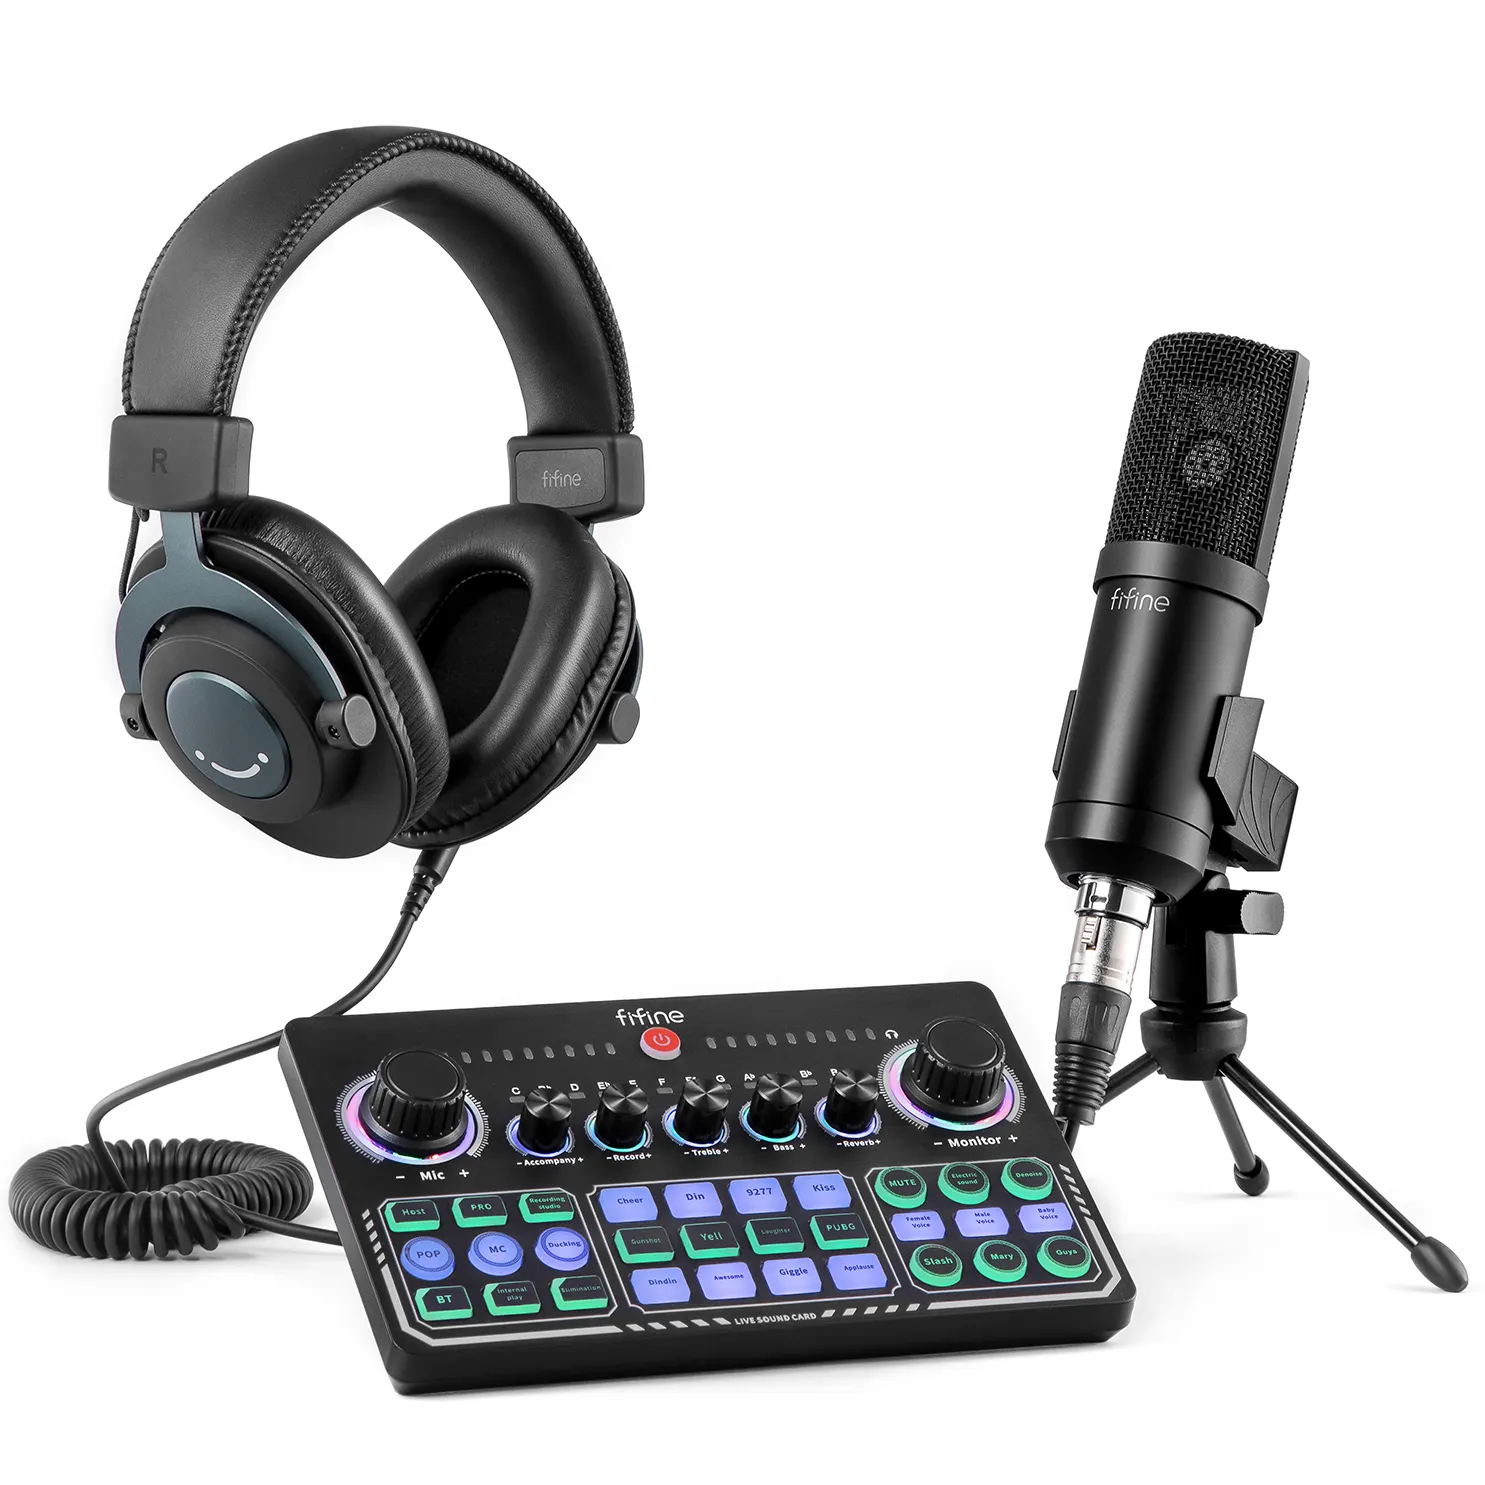 Fifine K740-SC6-H8 Recording 3.5mm Headphone Monitor Microphone Recording Podcasting Audio Mixer Audio Sound Cards